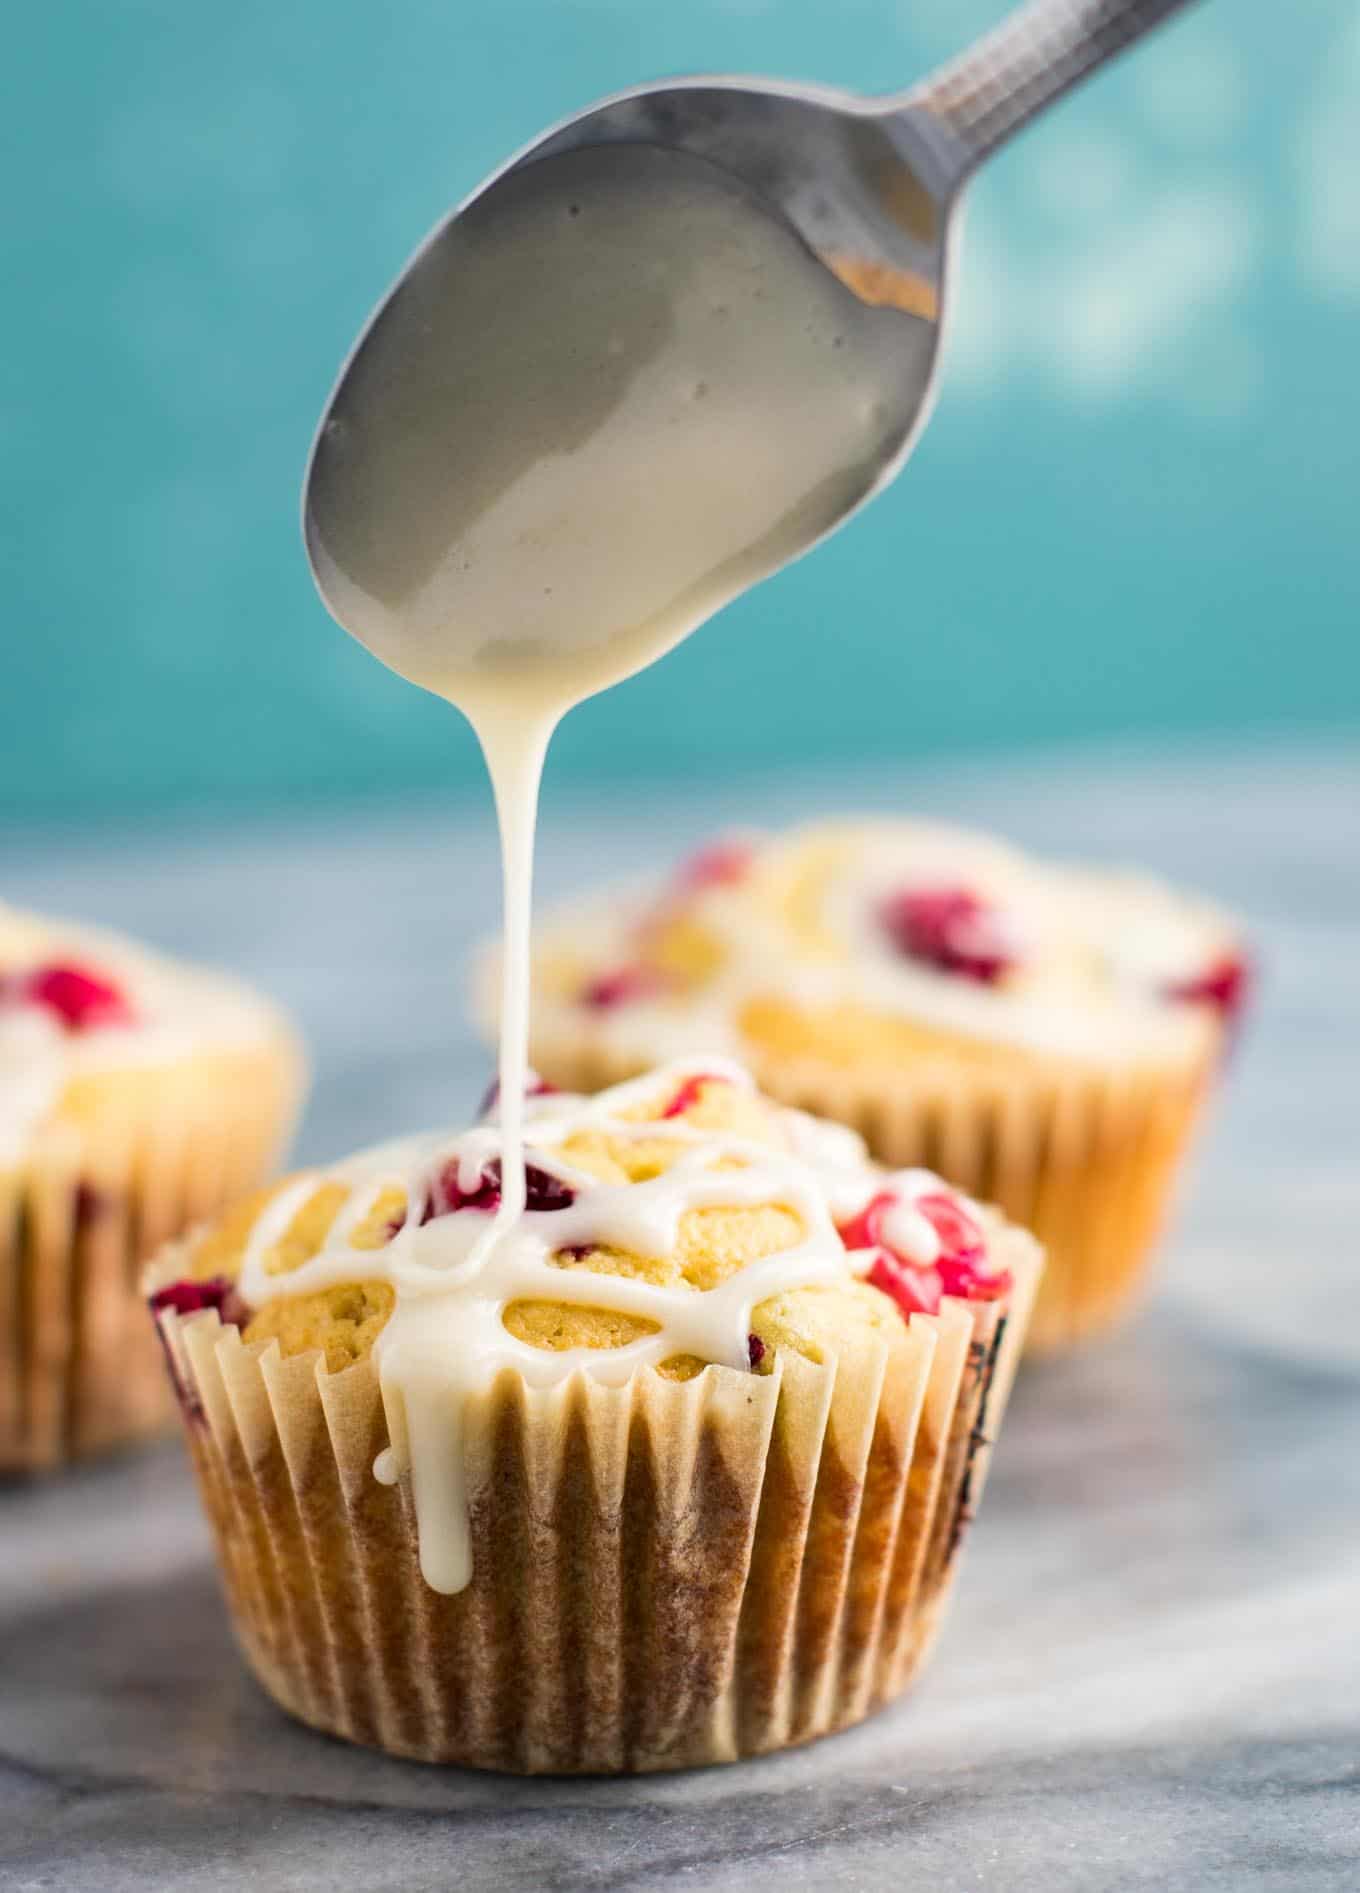 fresh cranberry recipes - These cranberry cream cheese muffins are so delicious! Perfect homemade Christmas breakfast! #cranberry #cranberrymuffins #breakfast #christmas